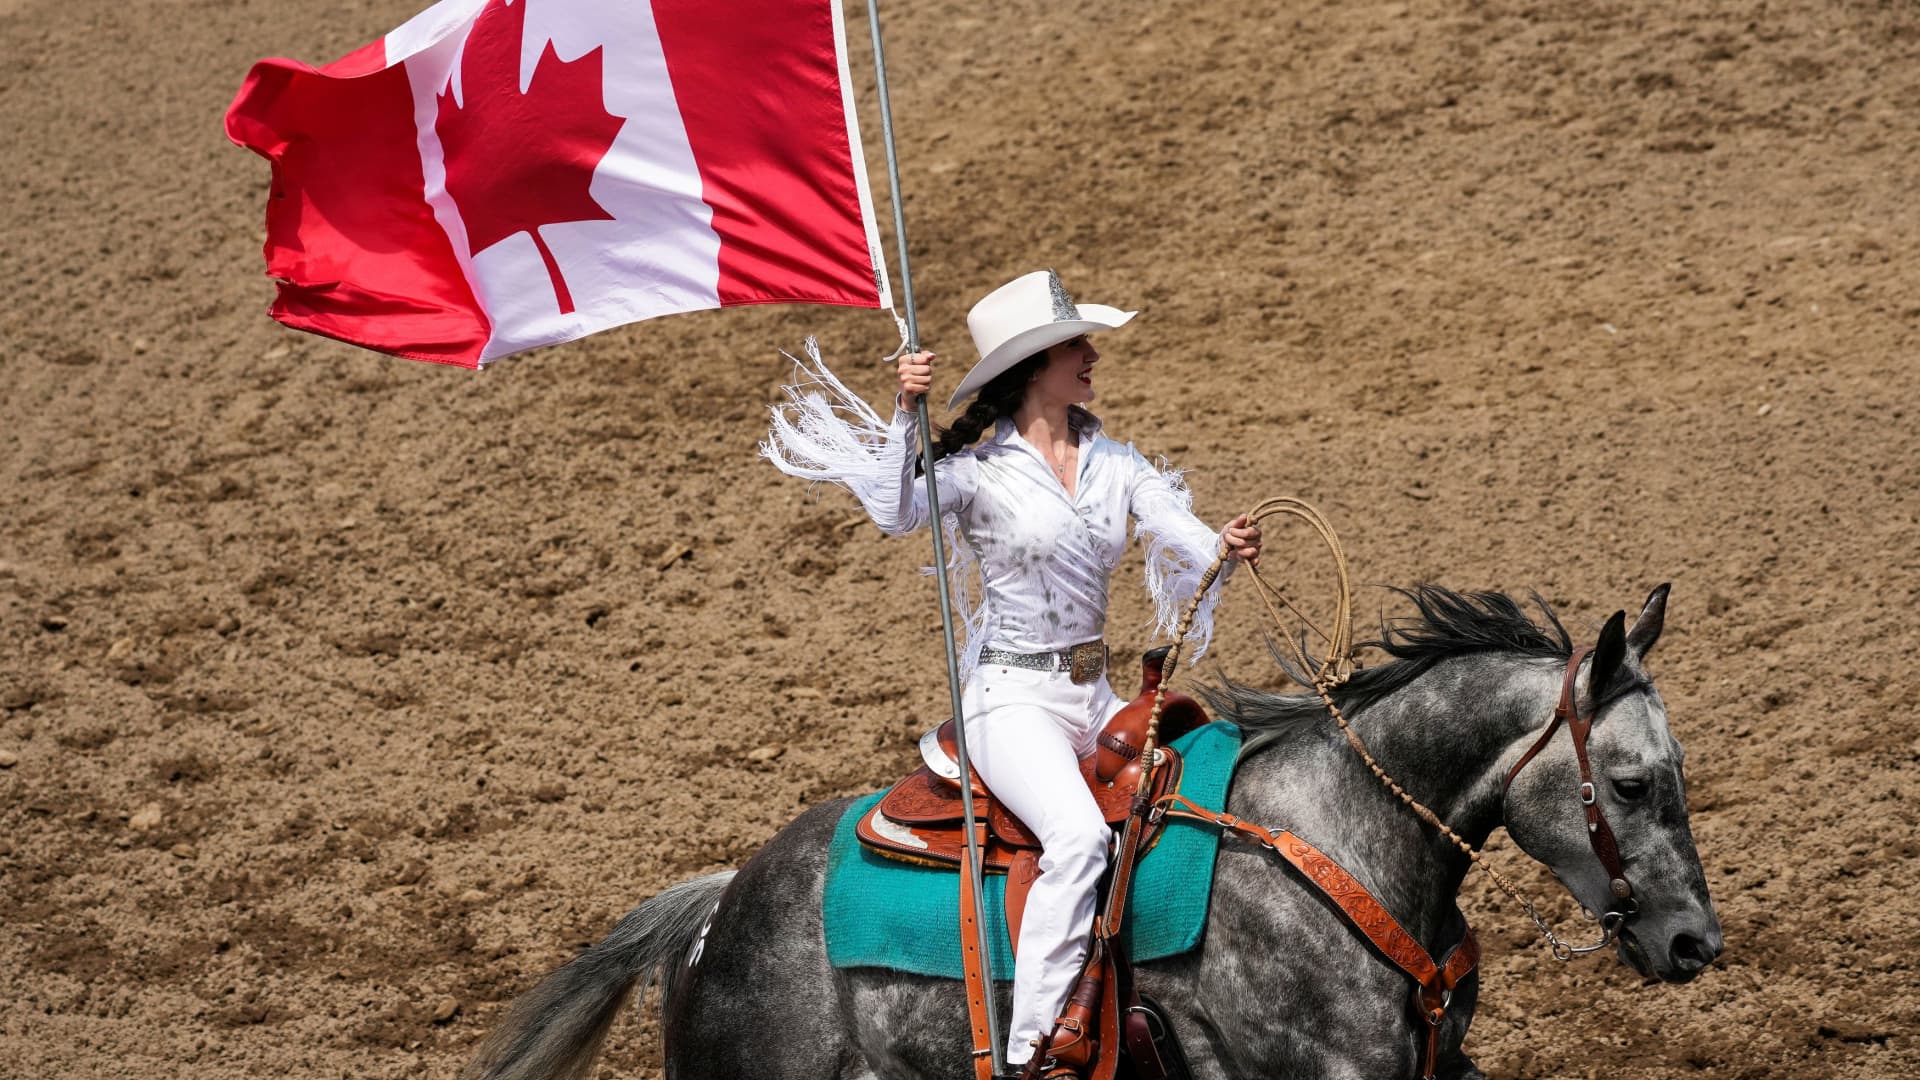 A Calgary Stampede Princess carries the Canadian flag at the start of the Calgary Stampede rodeo and exhibition, in Calgary, Alberta, Canada July 10, 2023.